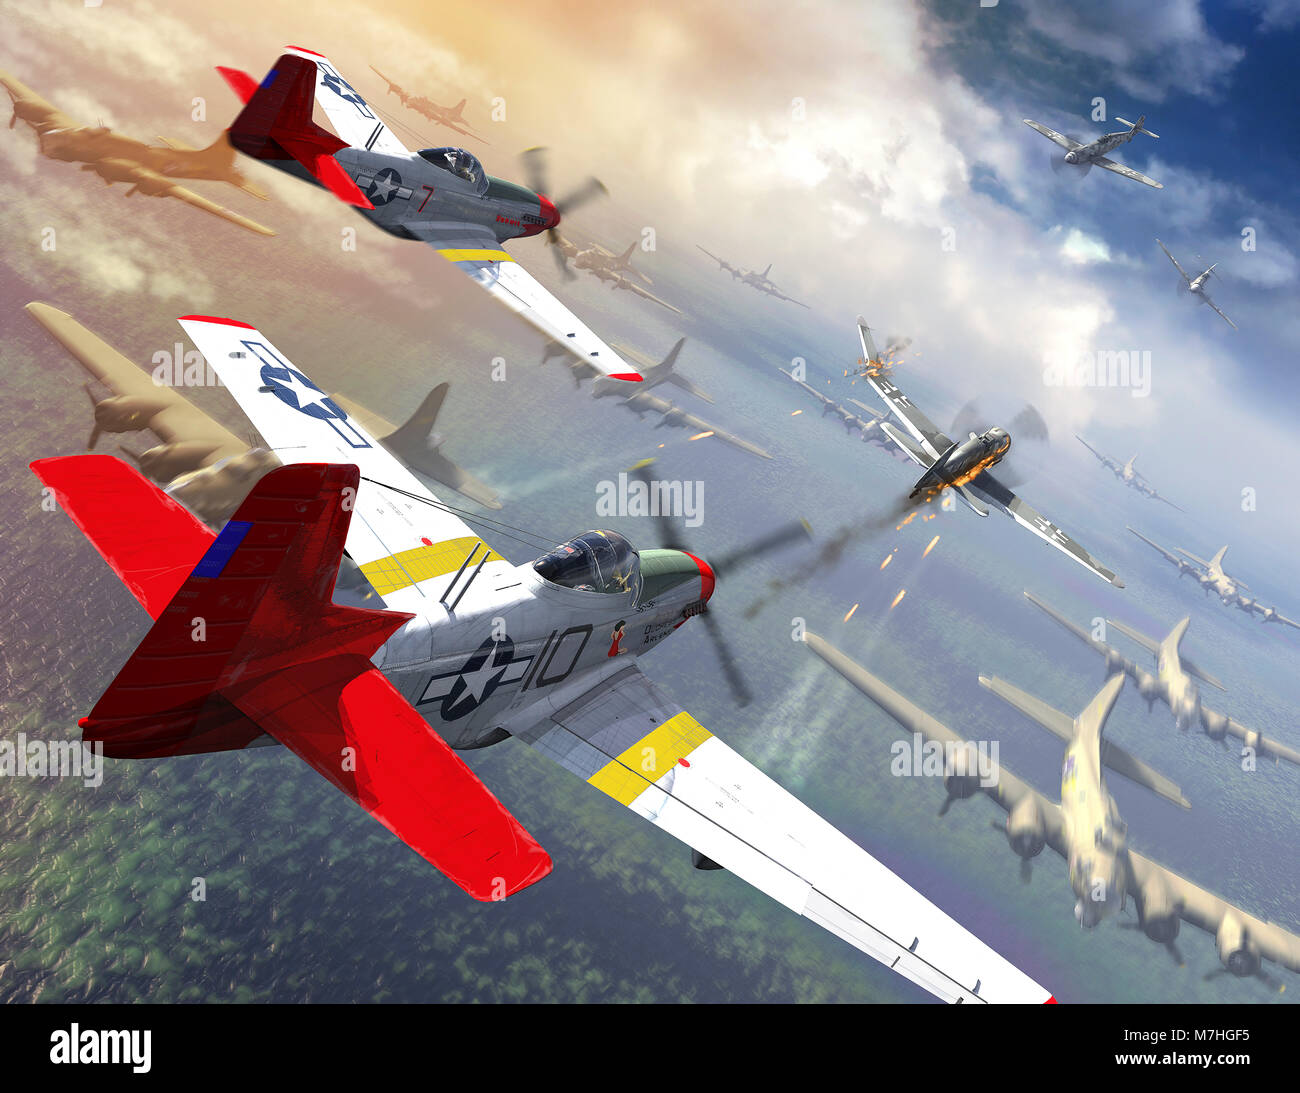 P-51 Mustangs escorting B-17 bombers from German fighter planes. Stock Photo